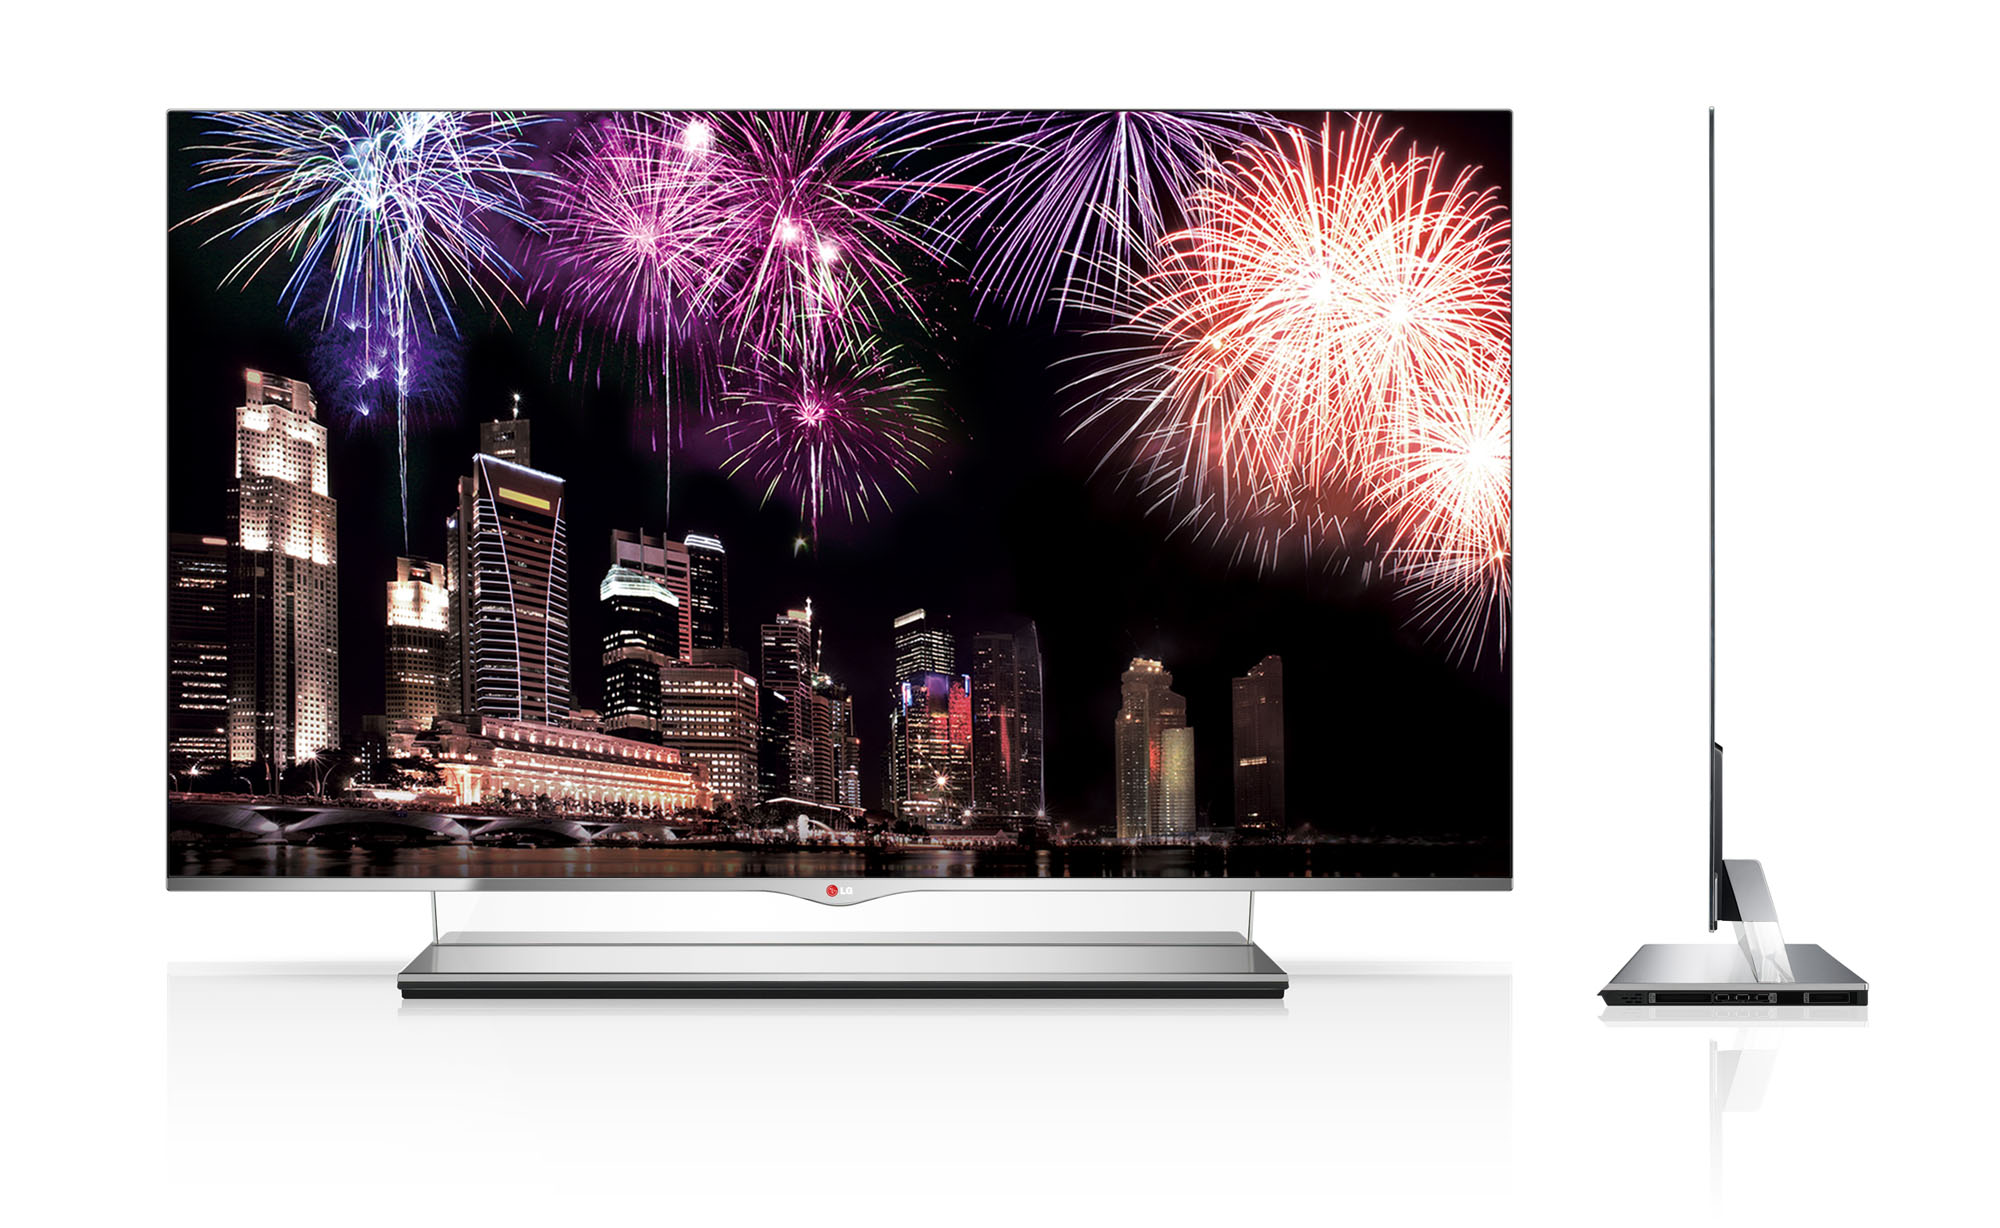 Front and side views of the LG 55-inch class (54.6-inch diagonal) WRGB OLED TV Model 55EM9700